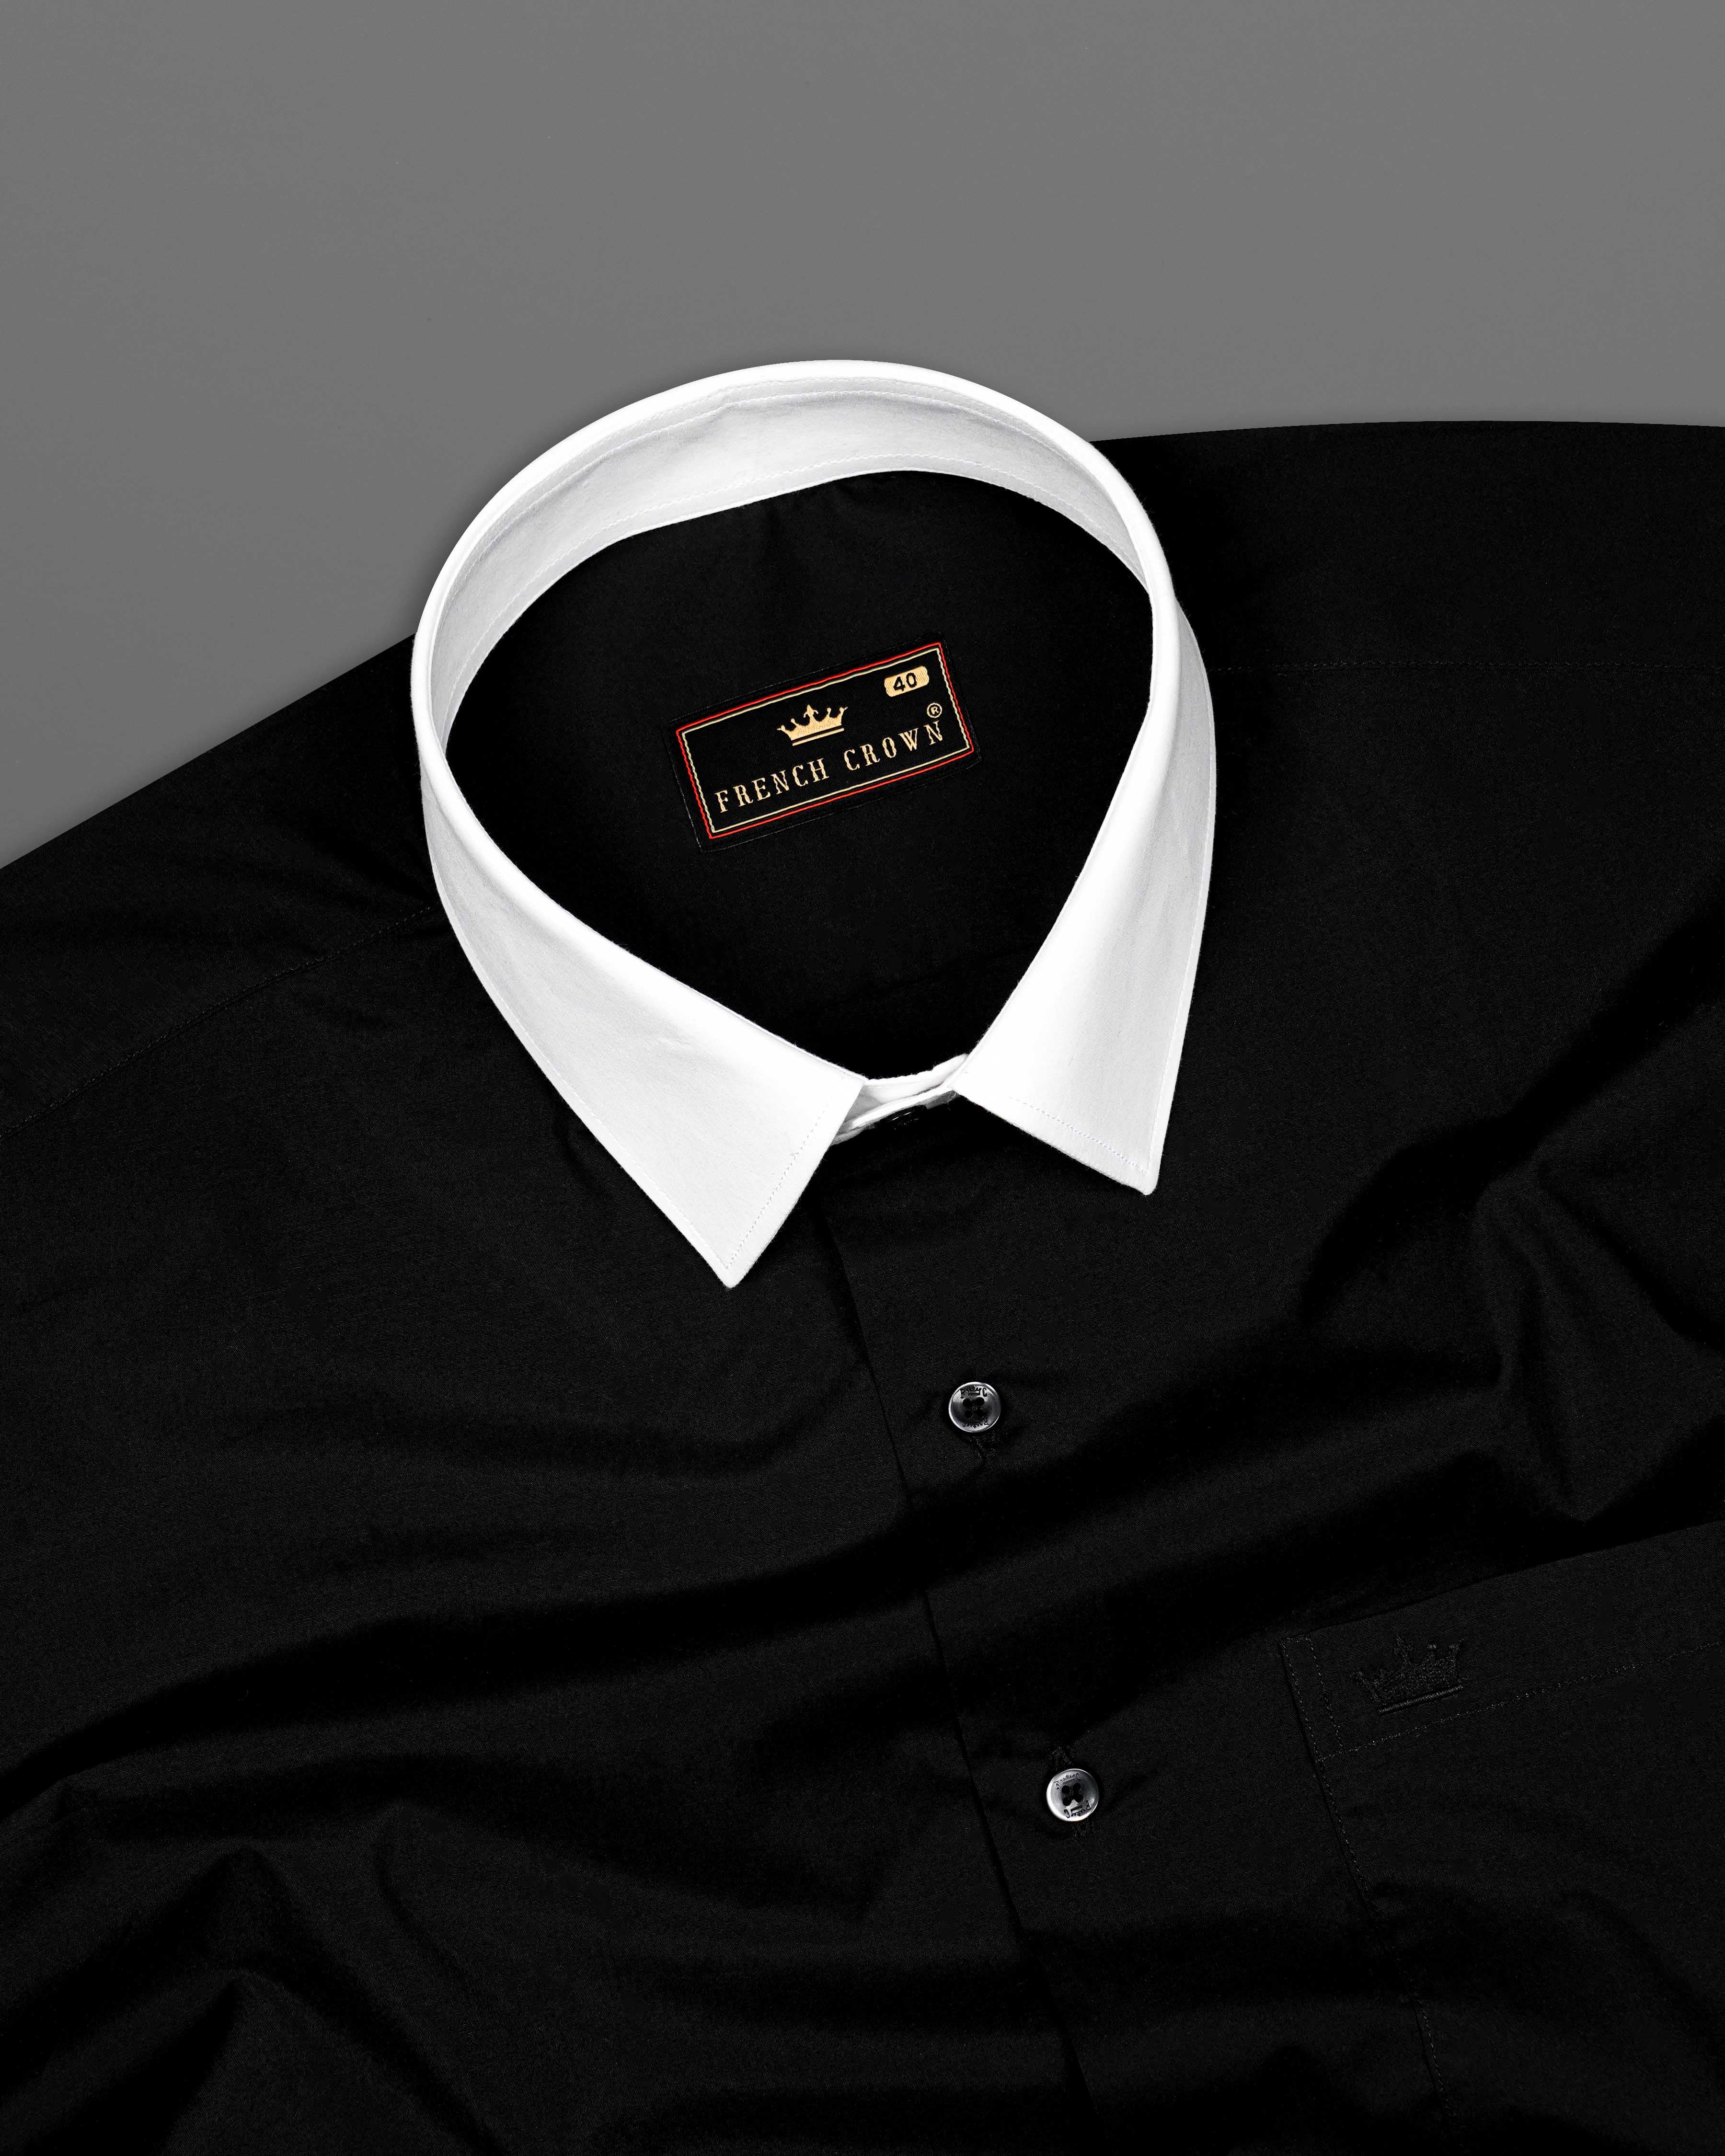 Jade Black with White Collar and Cuffs Premium Cotton Shirt 8524-WCC-38, 8524-WCC-H-38, 8524-WCC-39, 8524-WCC-H-39, 8524-WCC-40, 8524-WCC-H-40, 8524-WCC-42, 8524-WCC-H-42, 8524-WCC-44, 8524-WCC-H-44, 8524-WCC-46, 8524-WCC-H-46, 8524-WCC-48, 8524-WCC-H-48, 8524-WCC-50, 8524-WCC-H-50, 8524-WCC-52, 8524-WCC-H-52